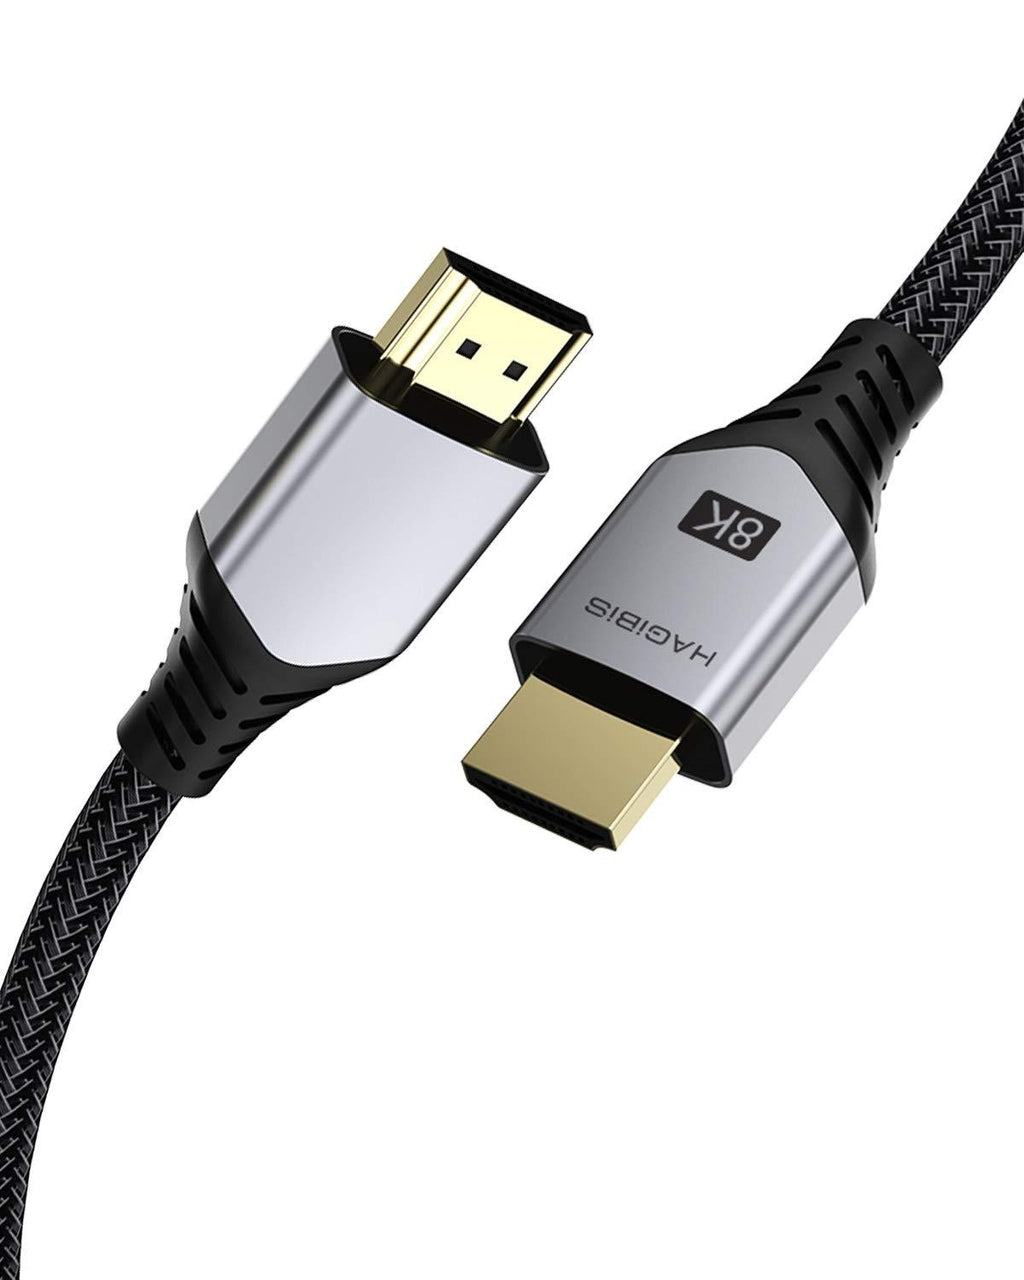 Hagibis HDMI 2.1 Cable 8K Ultra HD 144Hz 48Gbps High Speed HDMI Cable, 8K/60Hz 4K/120Hz Braided HDM Cord eARC HDR10 4:4:4 HDCP 2.2 & 2.3 for Dolby Vision Xbox PS4/5 NS Switch Apple TV 4K (1.5m/4.5ft) 1.5m/4.5ft